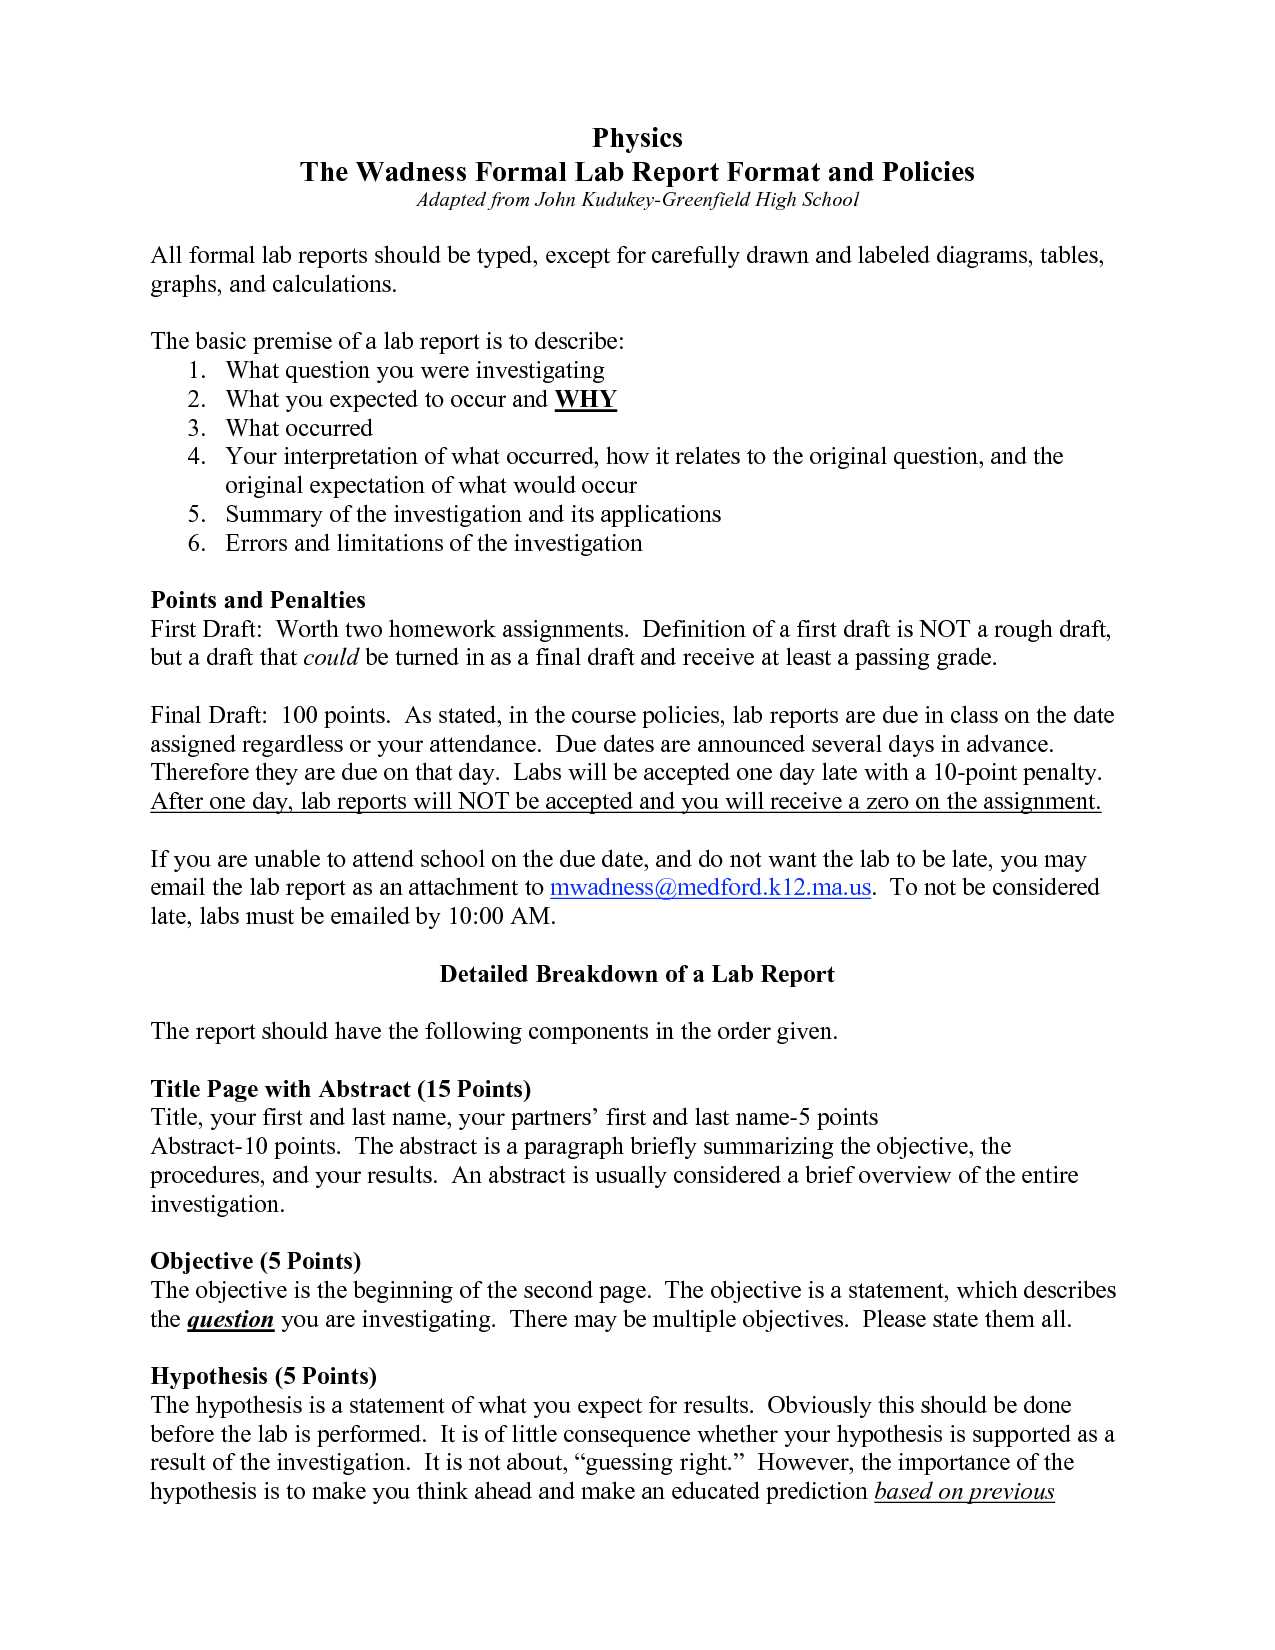 Formal Lab Report Template Physics : Biological Science For Formal Lab Report Template